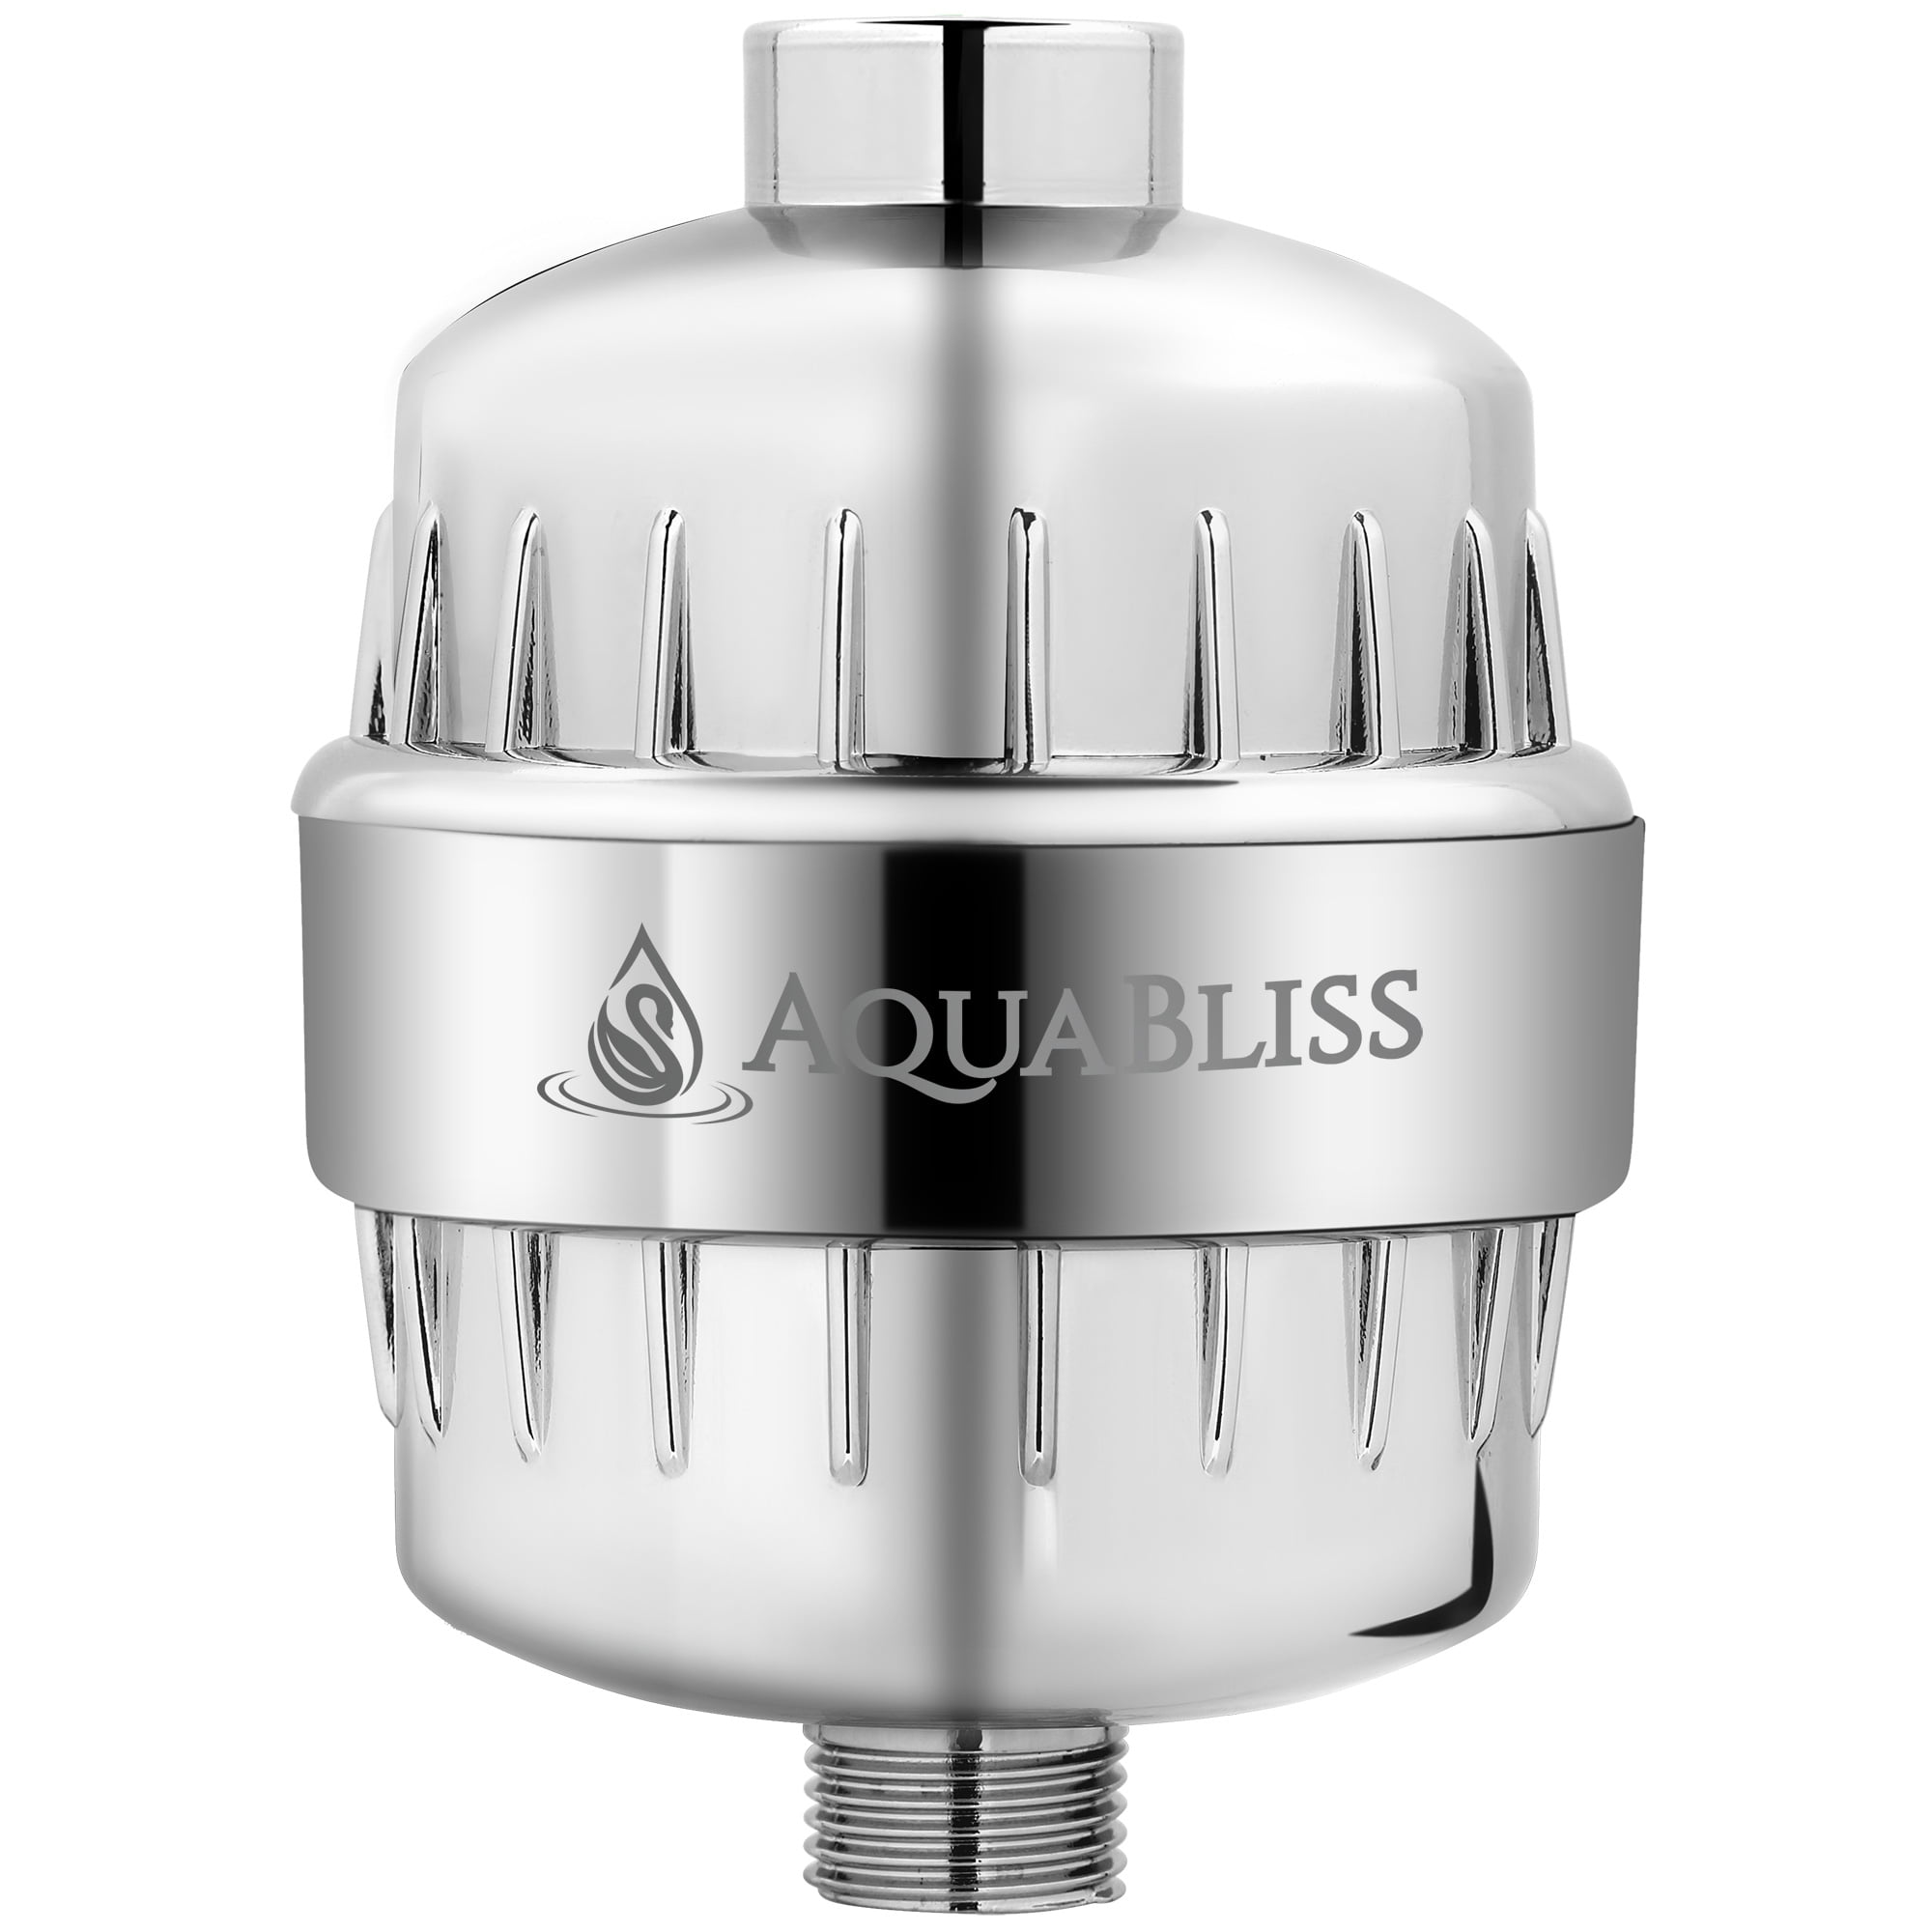 AquaBliss High Output Revitalizing Shower Filter - Reduces Dry Itchy Skin,  Dandruff, Eczema, and Dramatically Improves the Condition of Your Skin,  Hair and Nails - Chrome (SF100) 